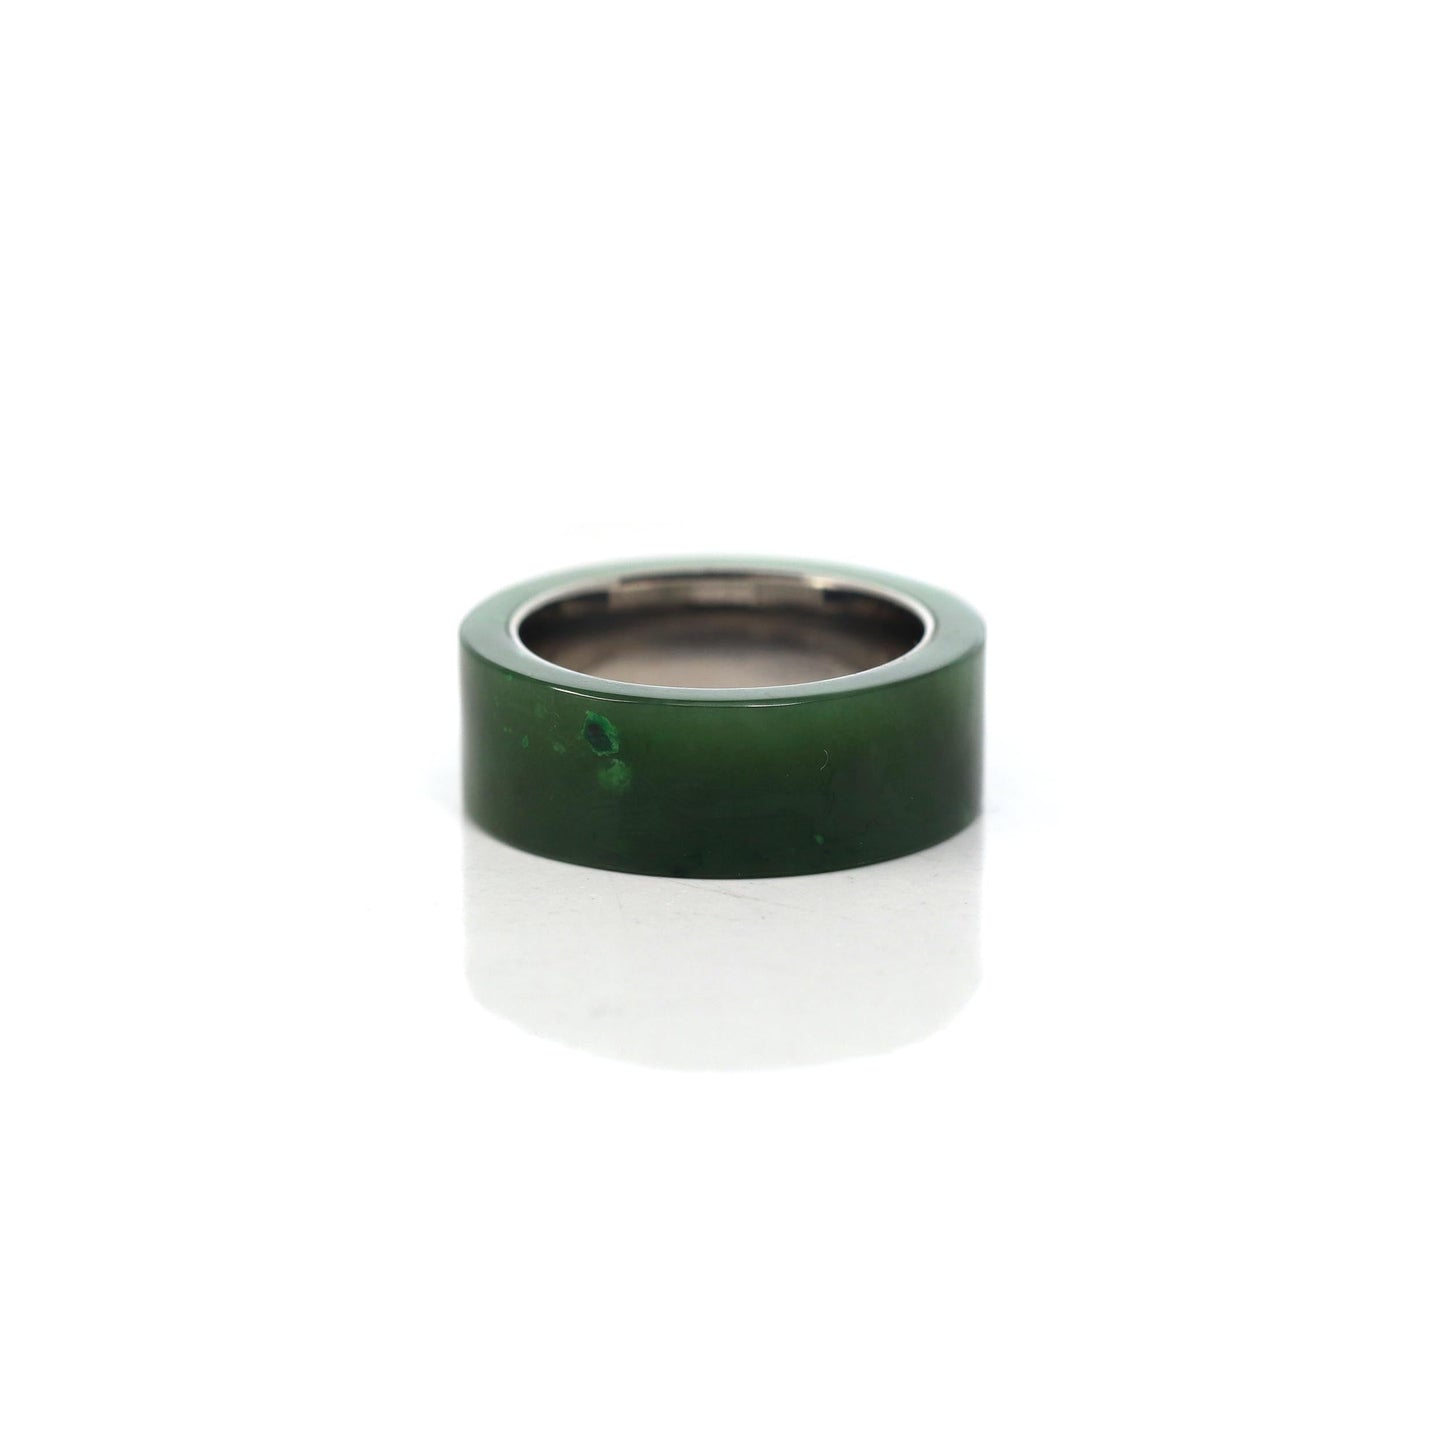 RealJade® Co. RealJade® Co. "Signature Signet" Stainless Steel Real Green Nephrite Jade Classic Men's Band